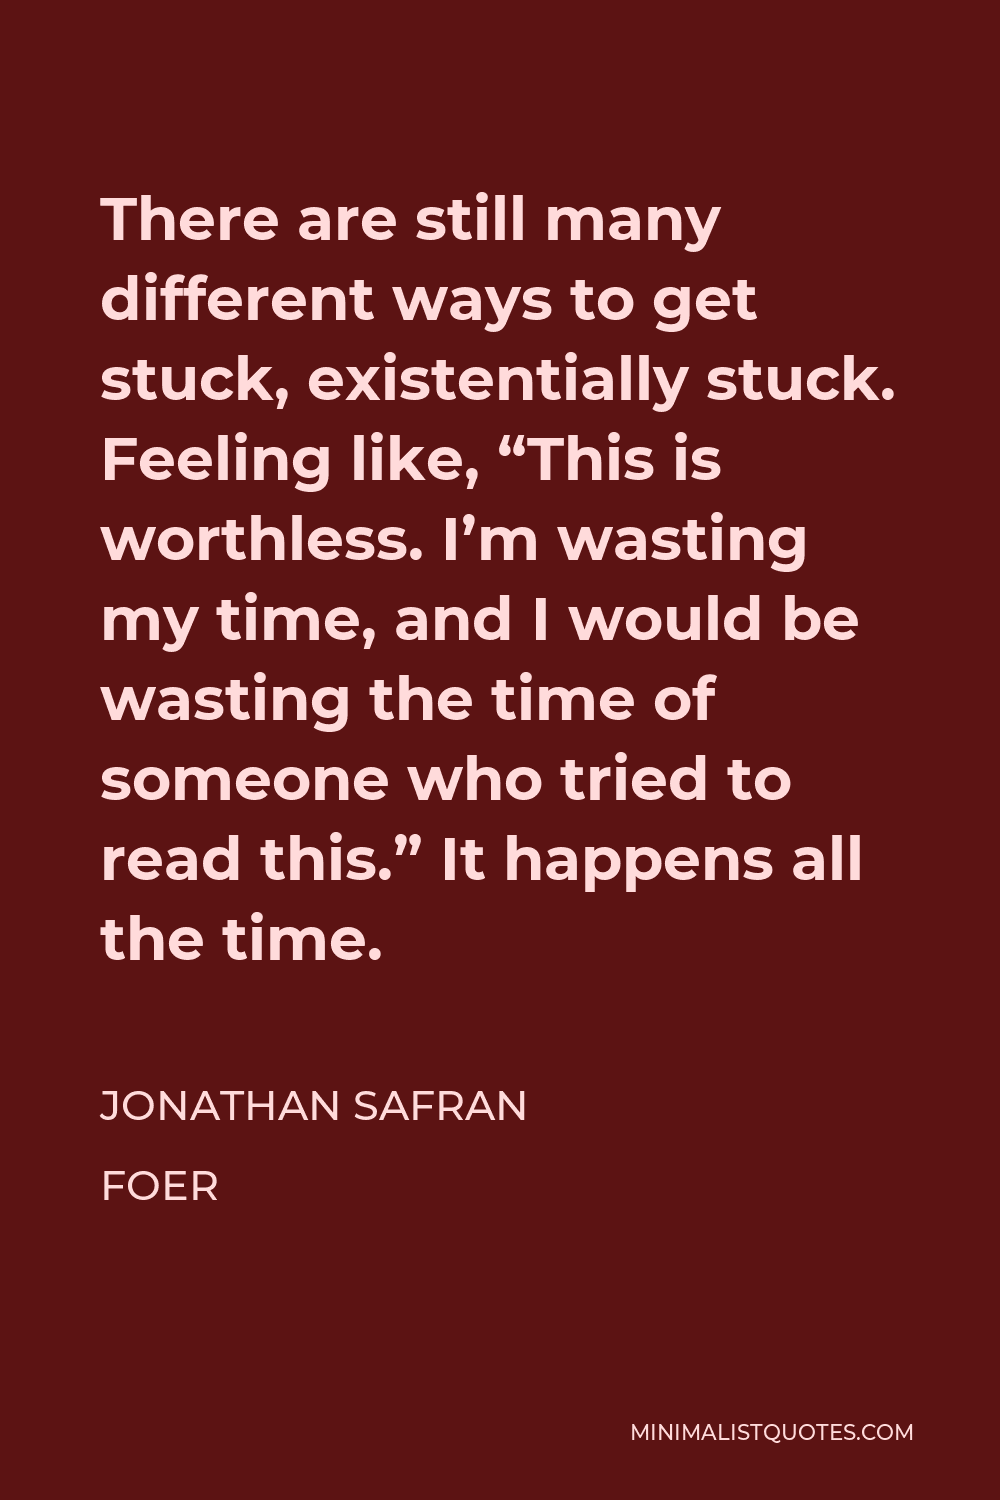 Jonathan Safran Foer Quote - There are still many different ways to get stuck, existentially stuck. Feeling like, “This is worthless. I’m wasting my time, and I would be wasting the time of someone who tried to read this.” It happens all the time.